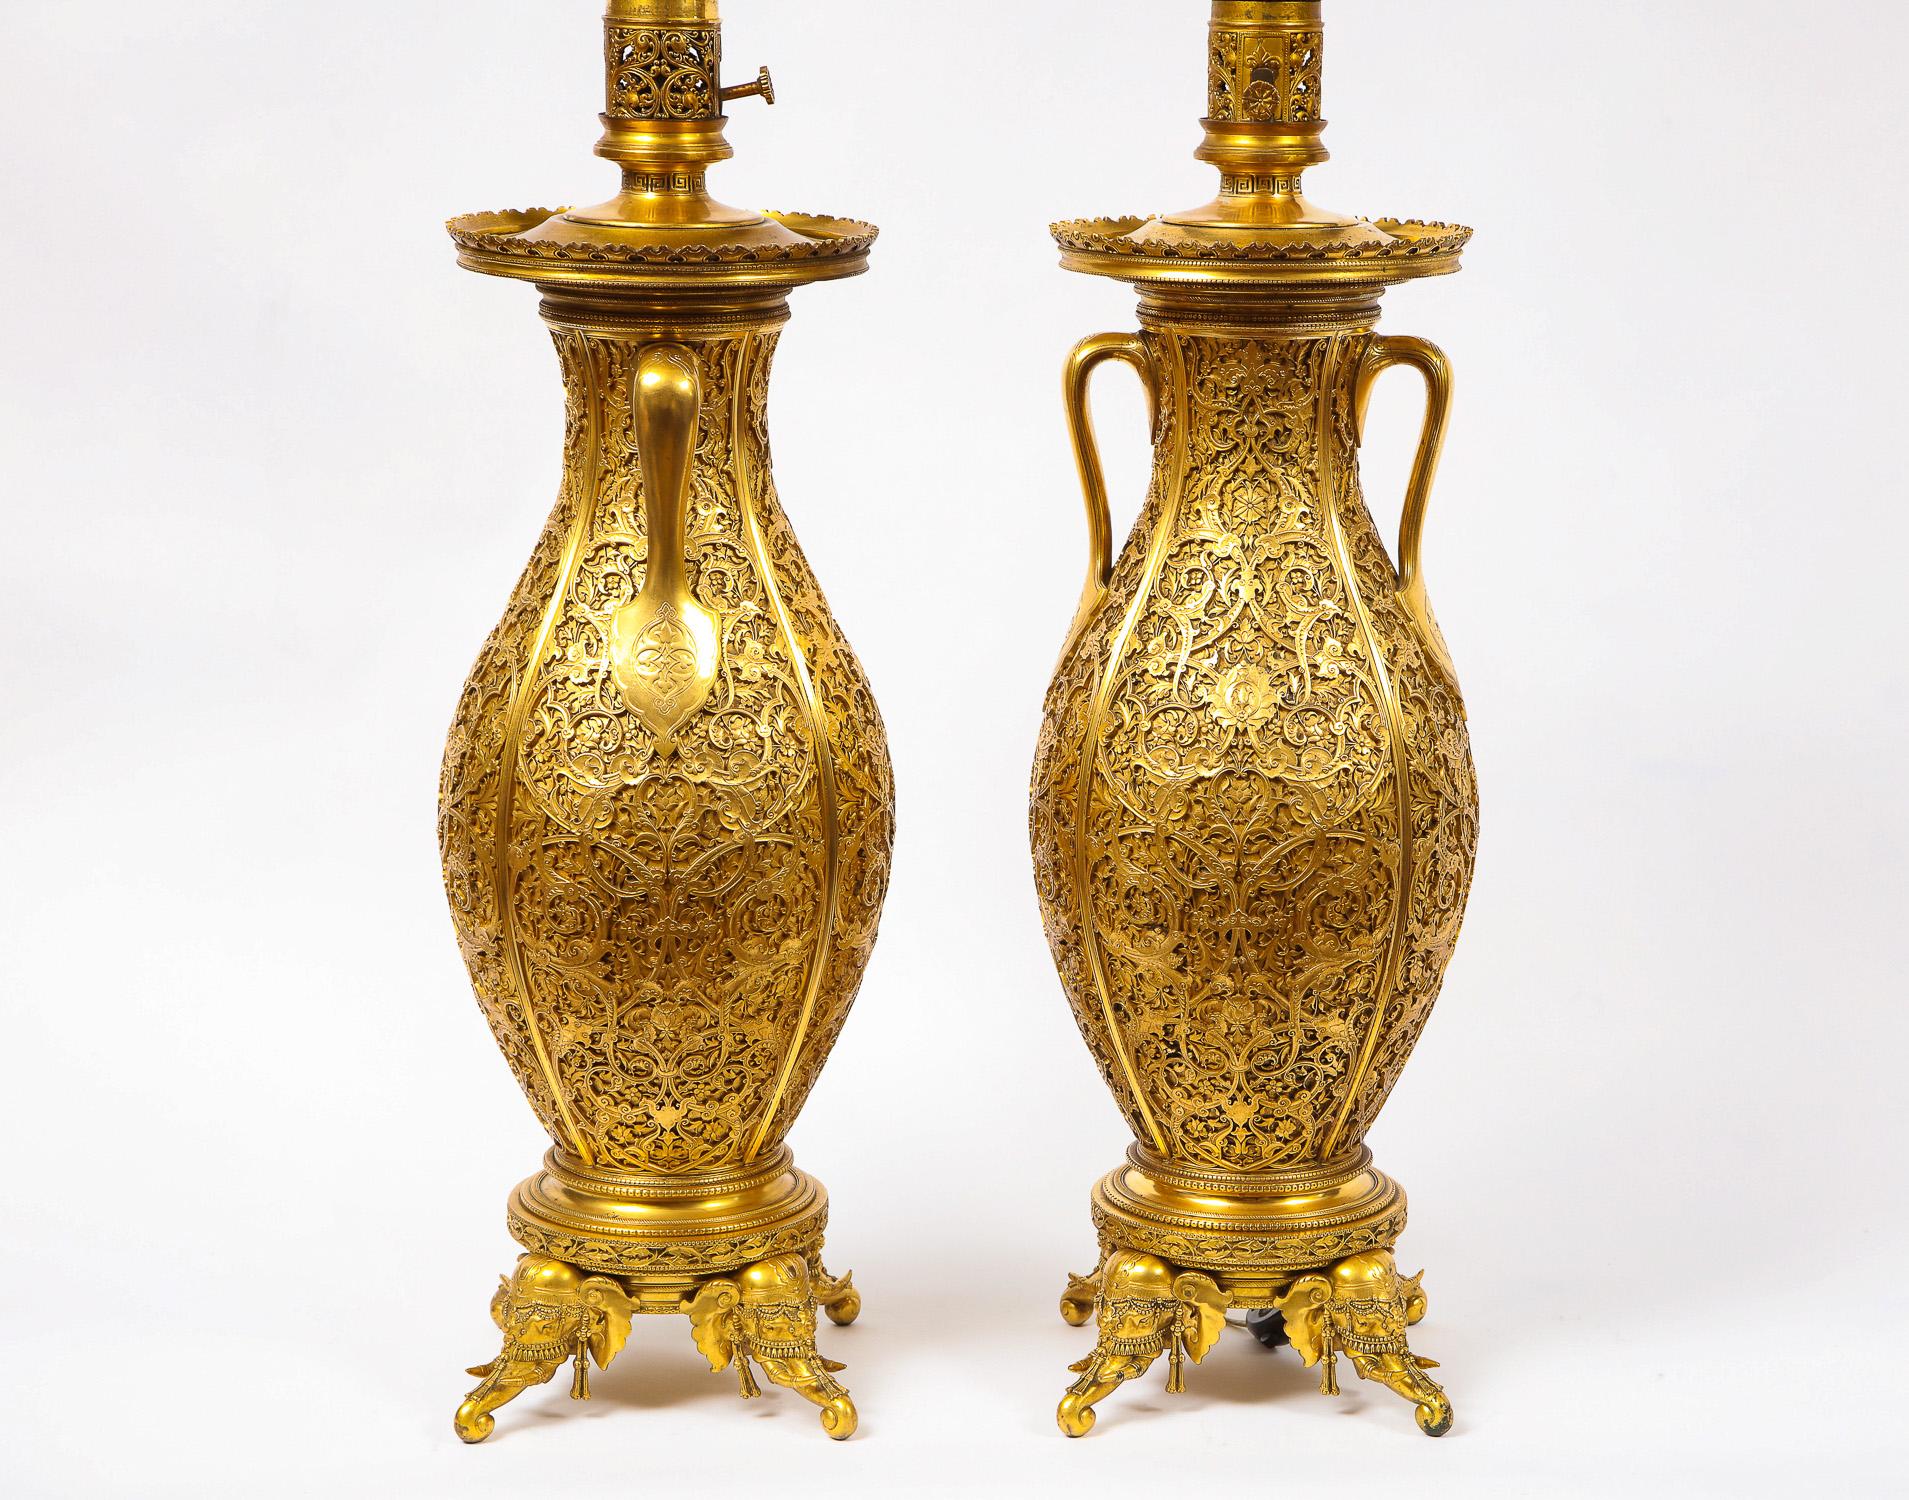 Pair of French Japonisme Ormolu Vases E. Lièvre, Executed by F. Barbedienne For Sale 4